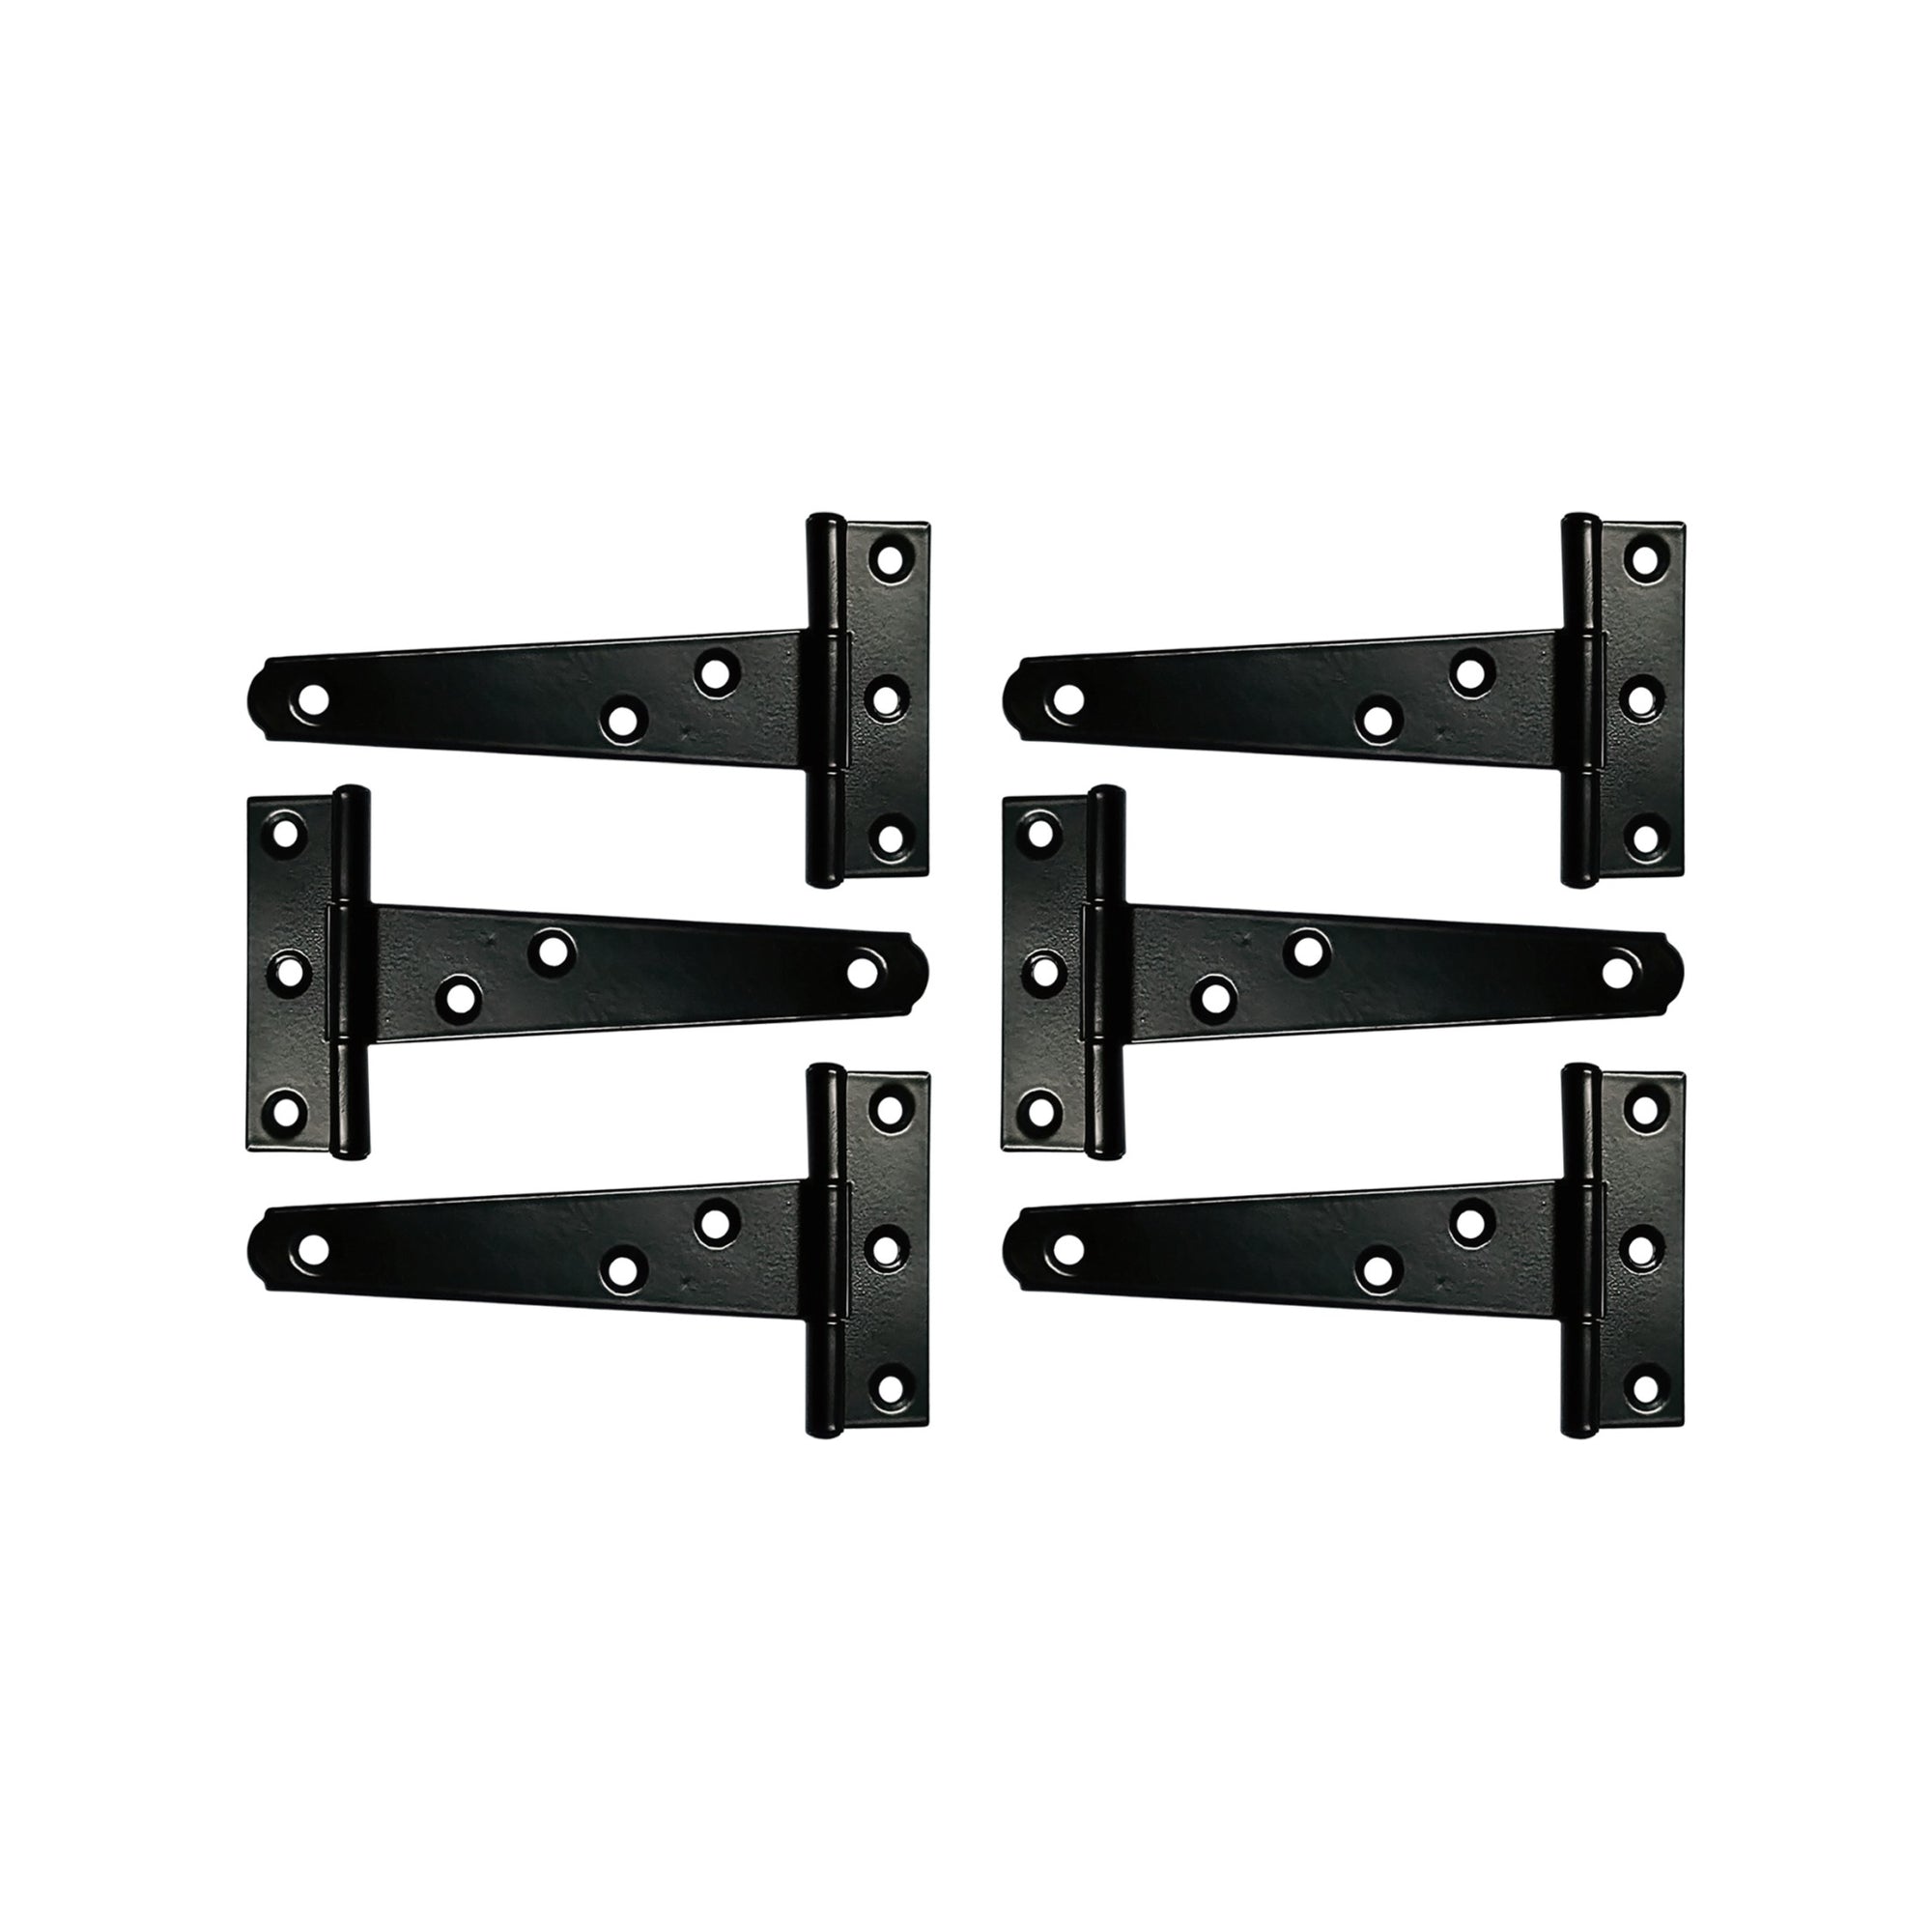 T-Hinge Heavy Duty Gate Hinges for Wooden and Metal Fences, Doors, Cabinets - Set of 6 Pieces - Black Powder Coated